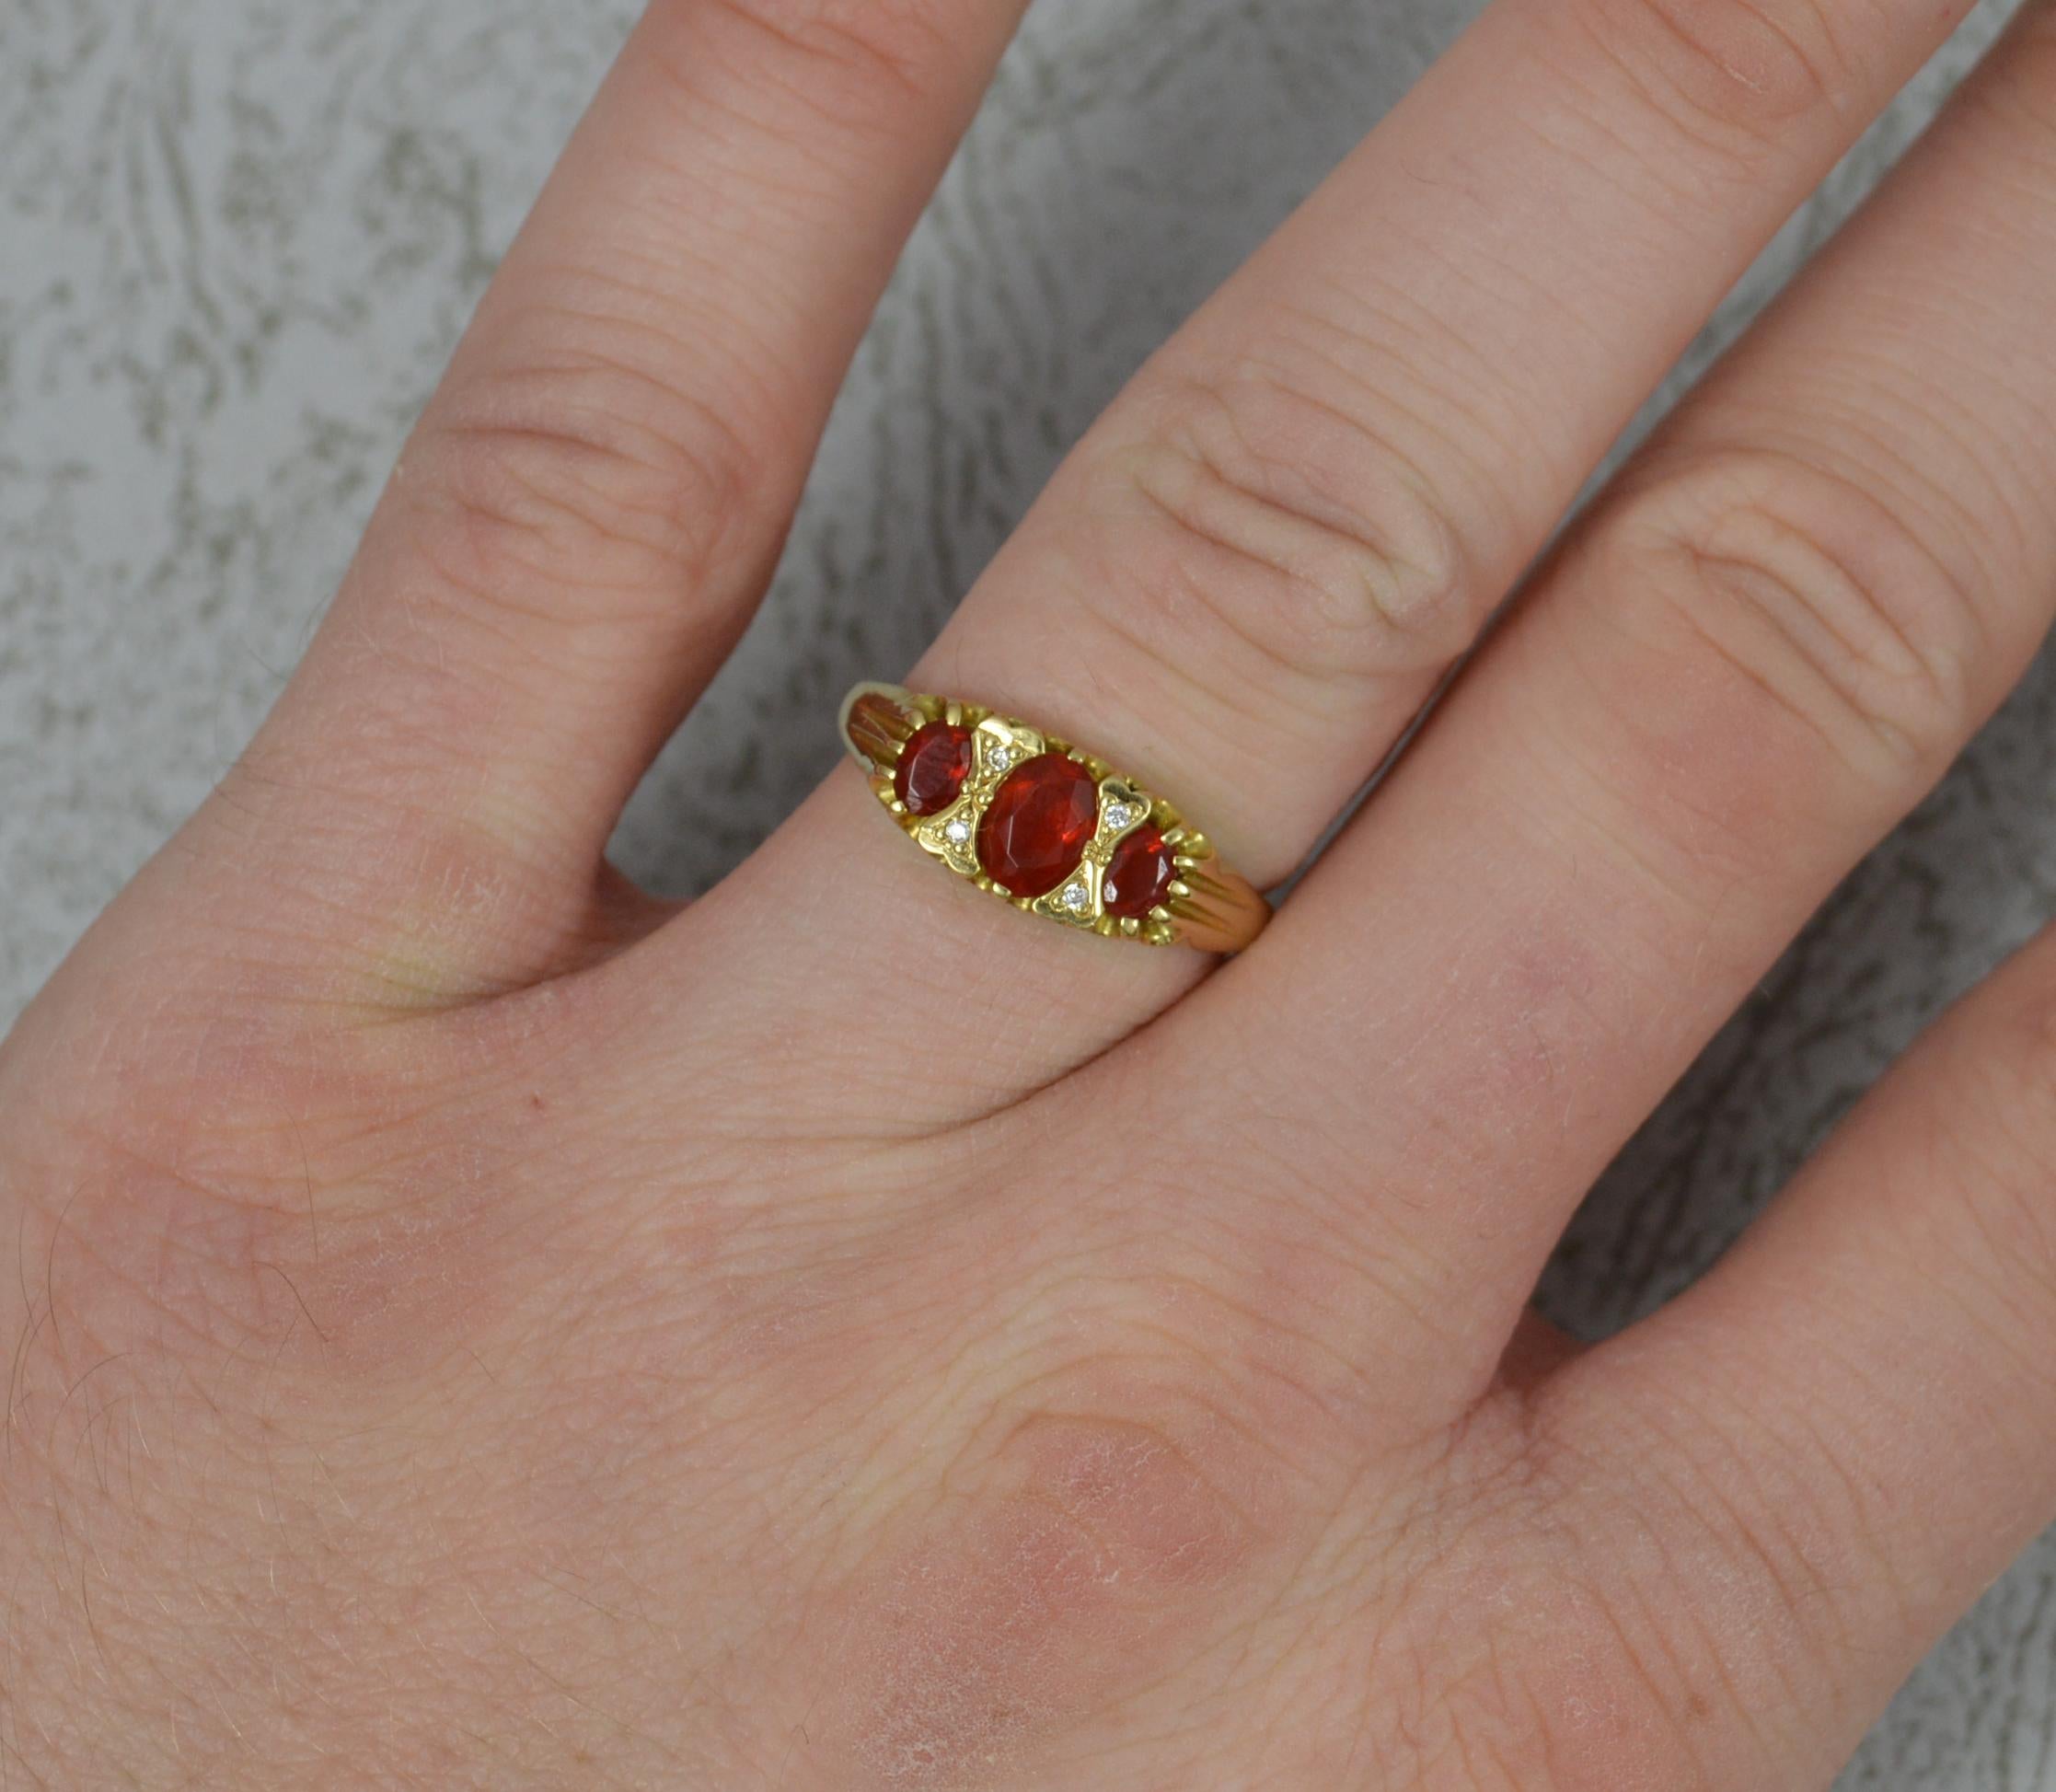 A beautiful ladies 18 carat gold fire opal and diamond cluster ring.
Solid 18 carat yellow gold example.
A Victorian design featuring three oval cut fire opals with pairs of small diamonds in between. Very deep coloured stones.
12mm x 7mm cluster